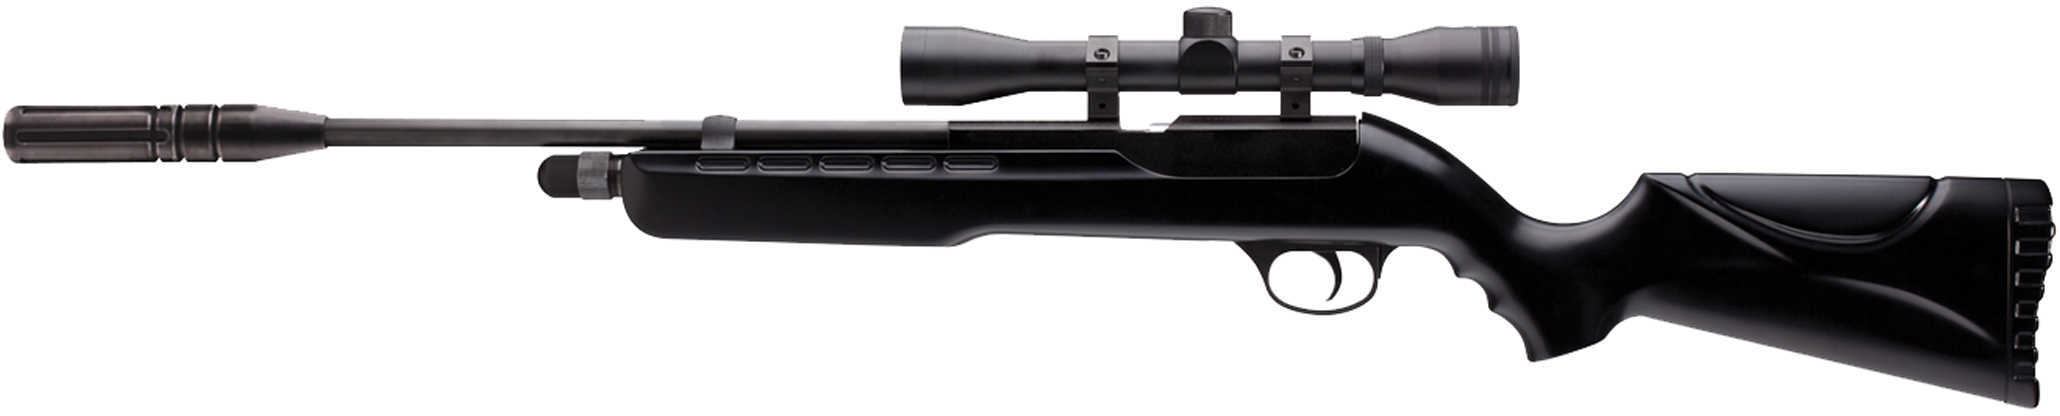 Umarex Fusion Combo .177 Co2 Air-Rifle W/ 4X32MM Scope